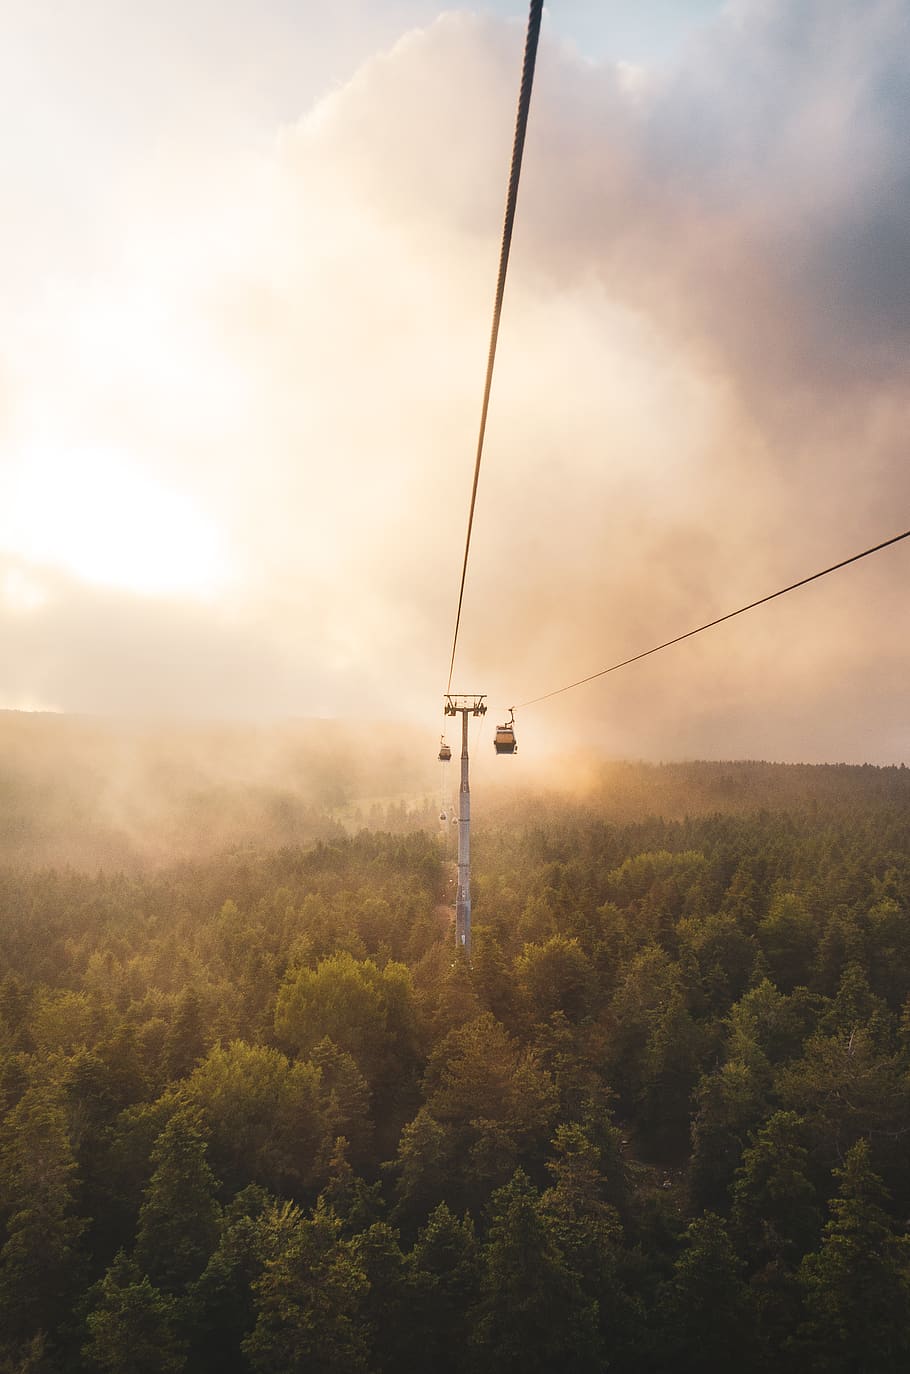 cable car under brown and white sky, nature, weather, outdoors